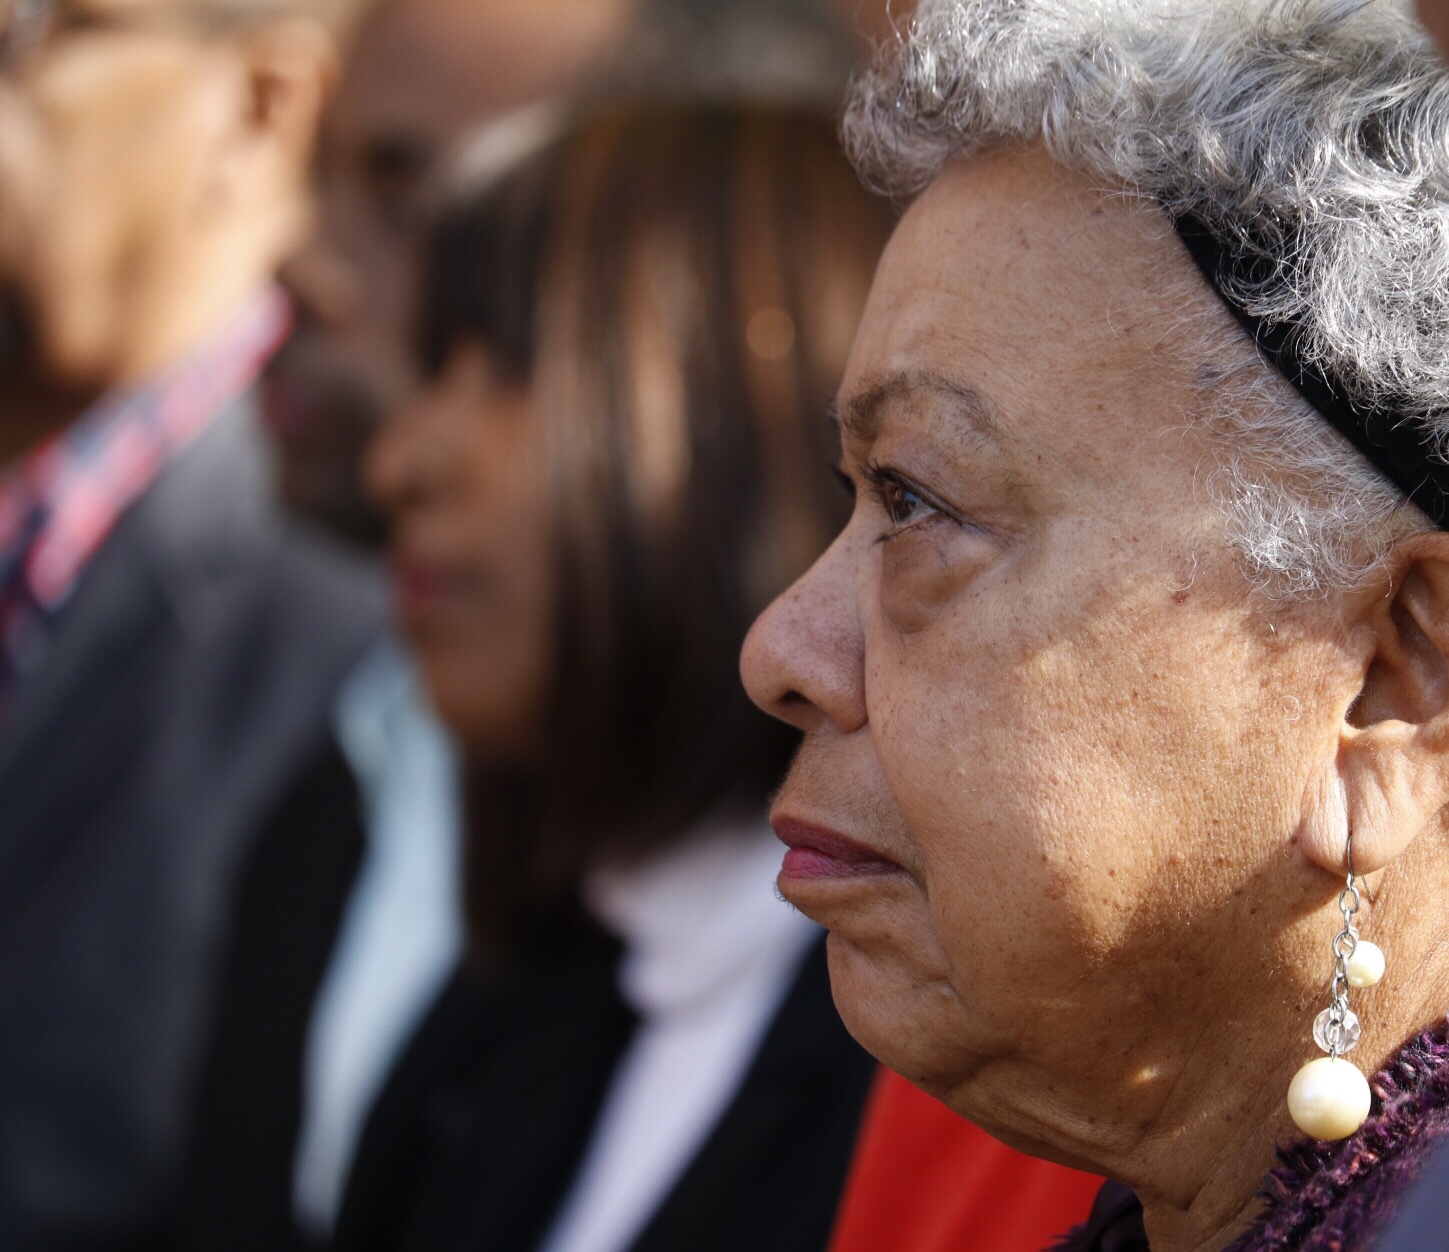 June White Dillard and other members of the Prince George's County chapter of the NAACP called attended an event Wednesday calling for the removal of Dr. Kevin Maxwell. (WTOP/Kate Ryan)